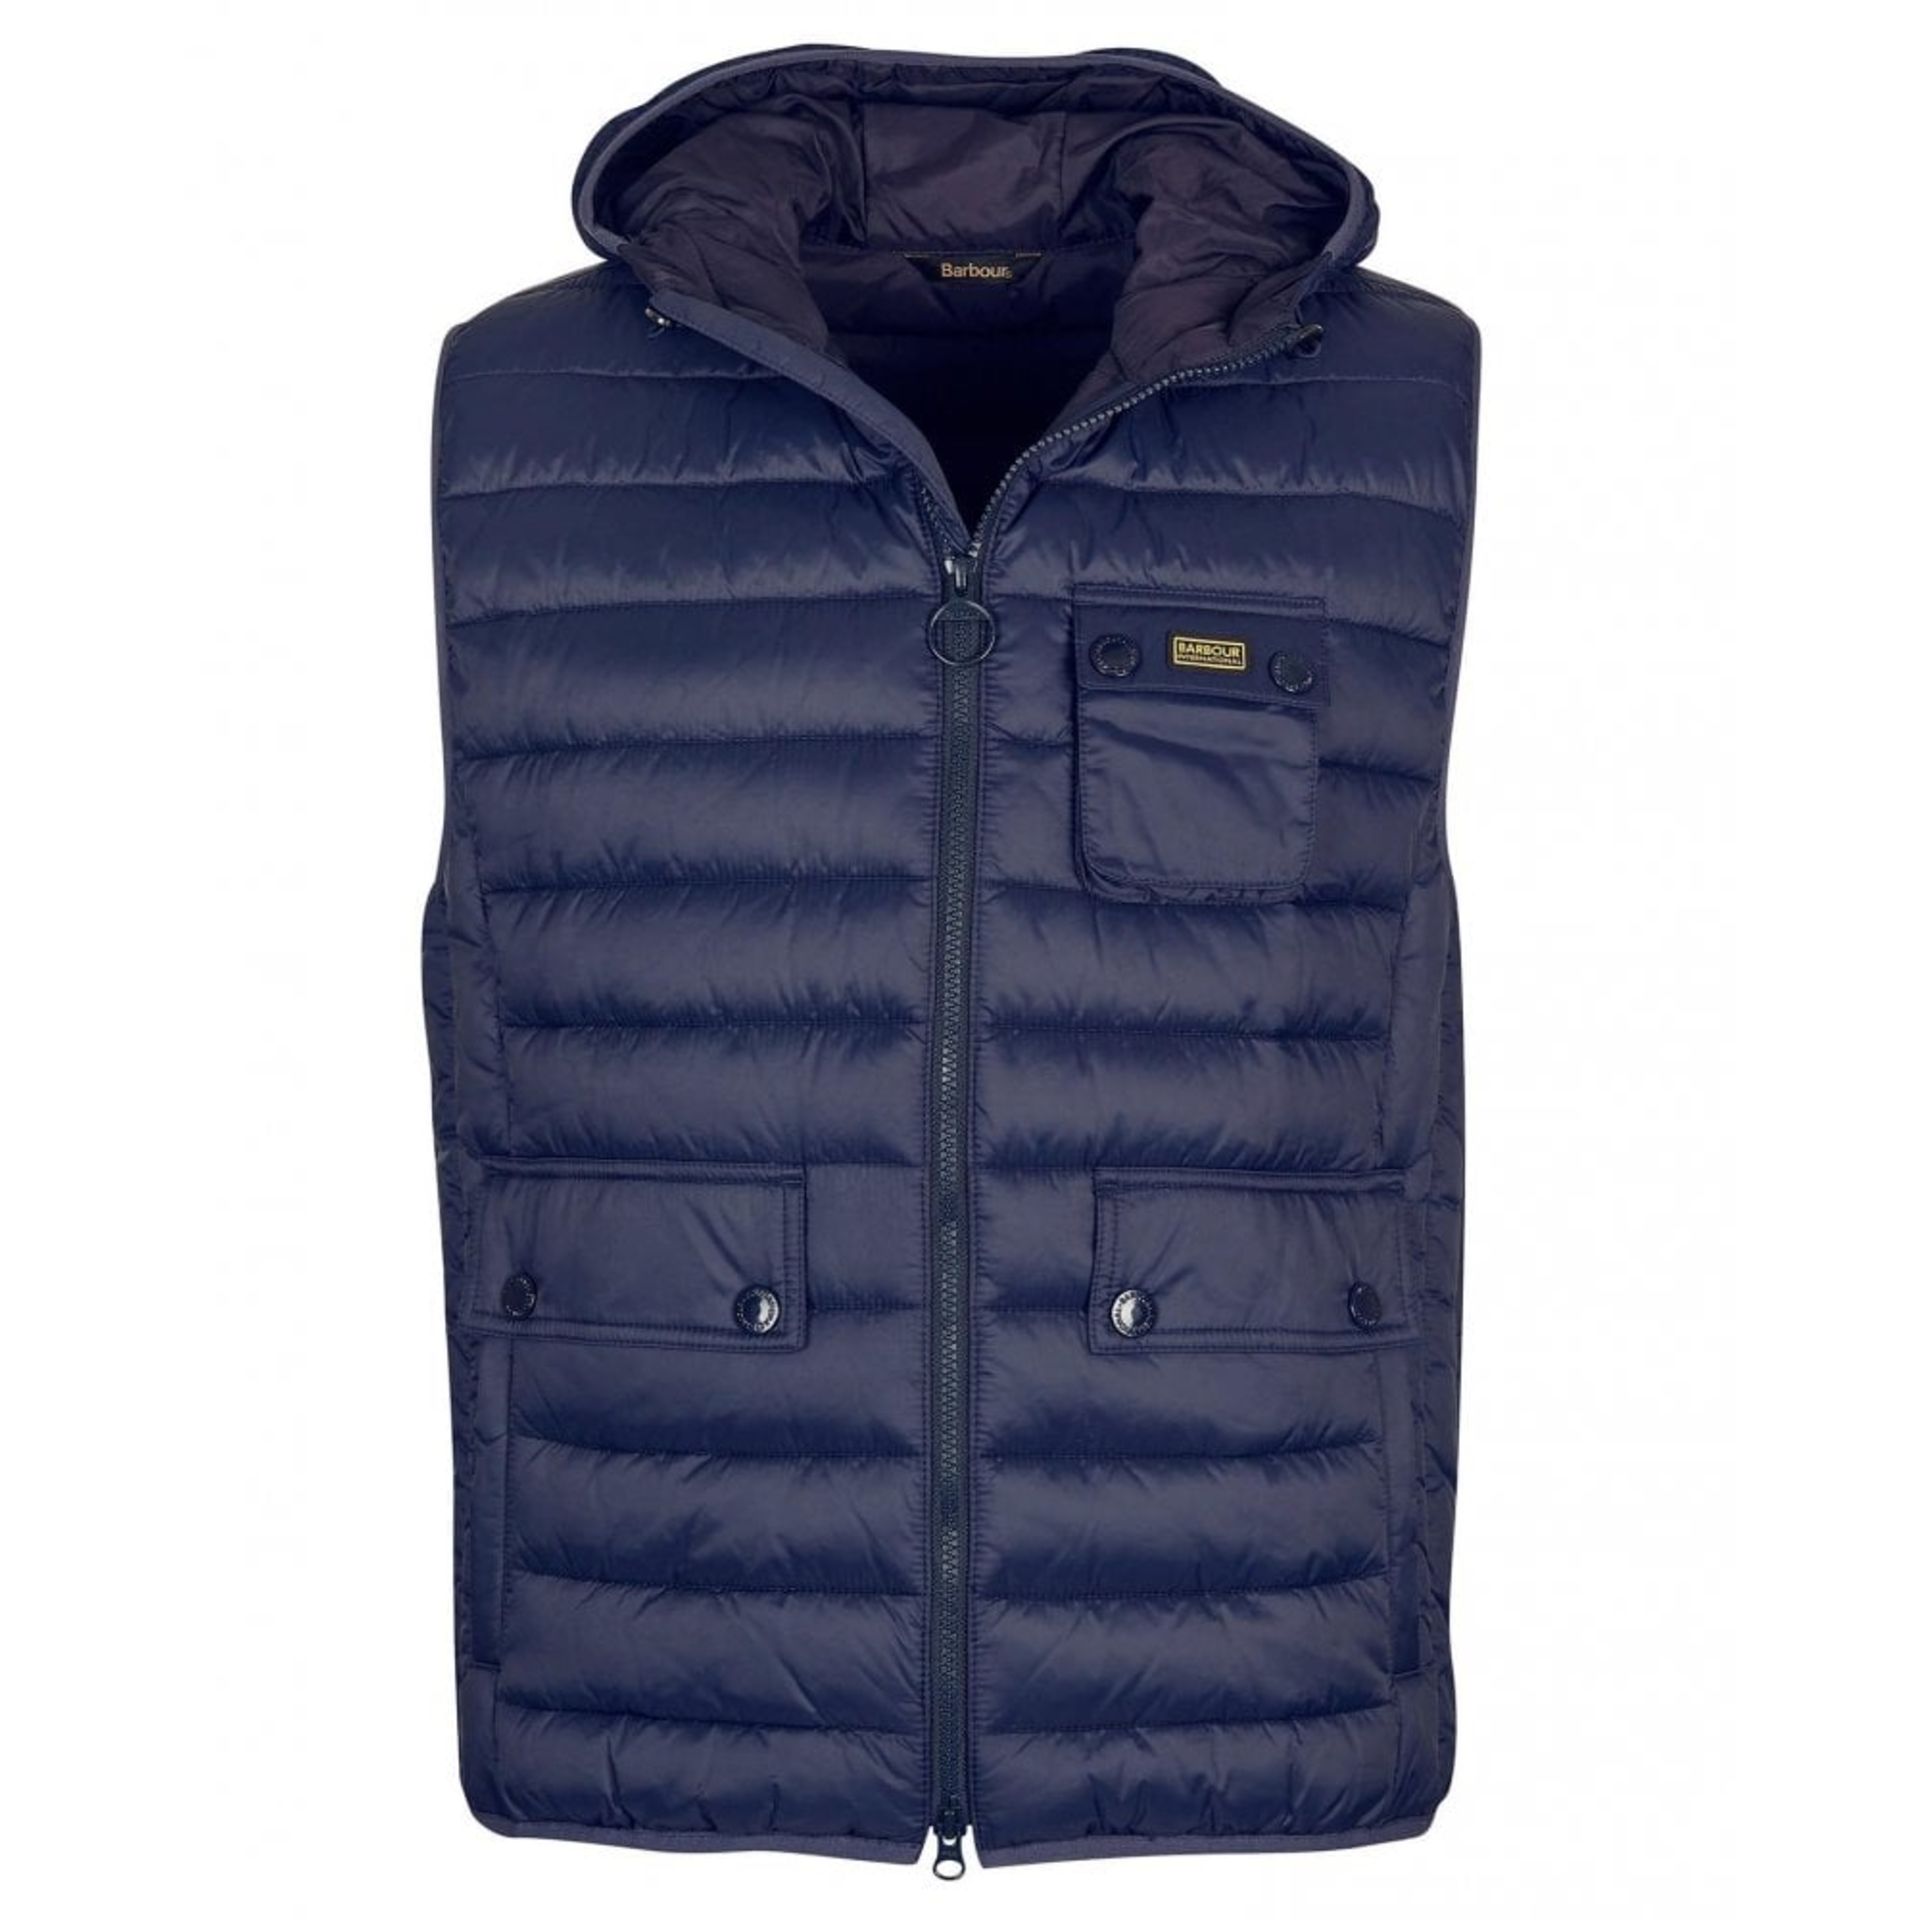 BRAND NEW BARBOUR INTL OUSTON GILET NAVY SIZE SMALL RRP £150 - 2